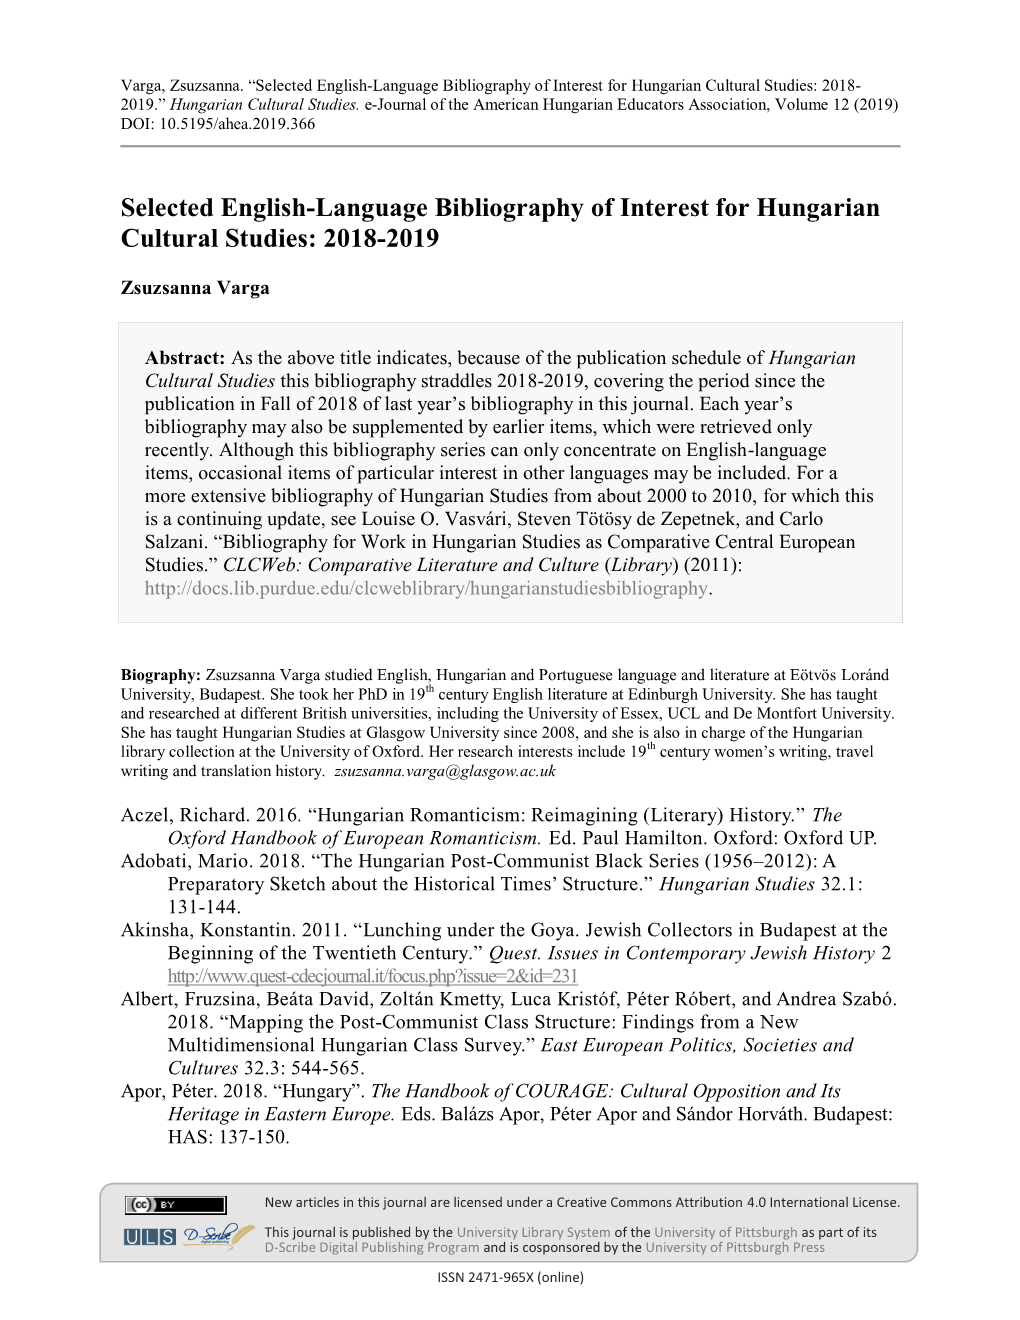 Selected English-Language Bibliography of Interest for Hungarian Cultural Studies: 2018- 2019.” Hungarian Cultural Studies